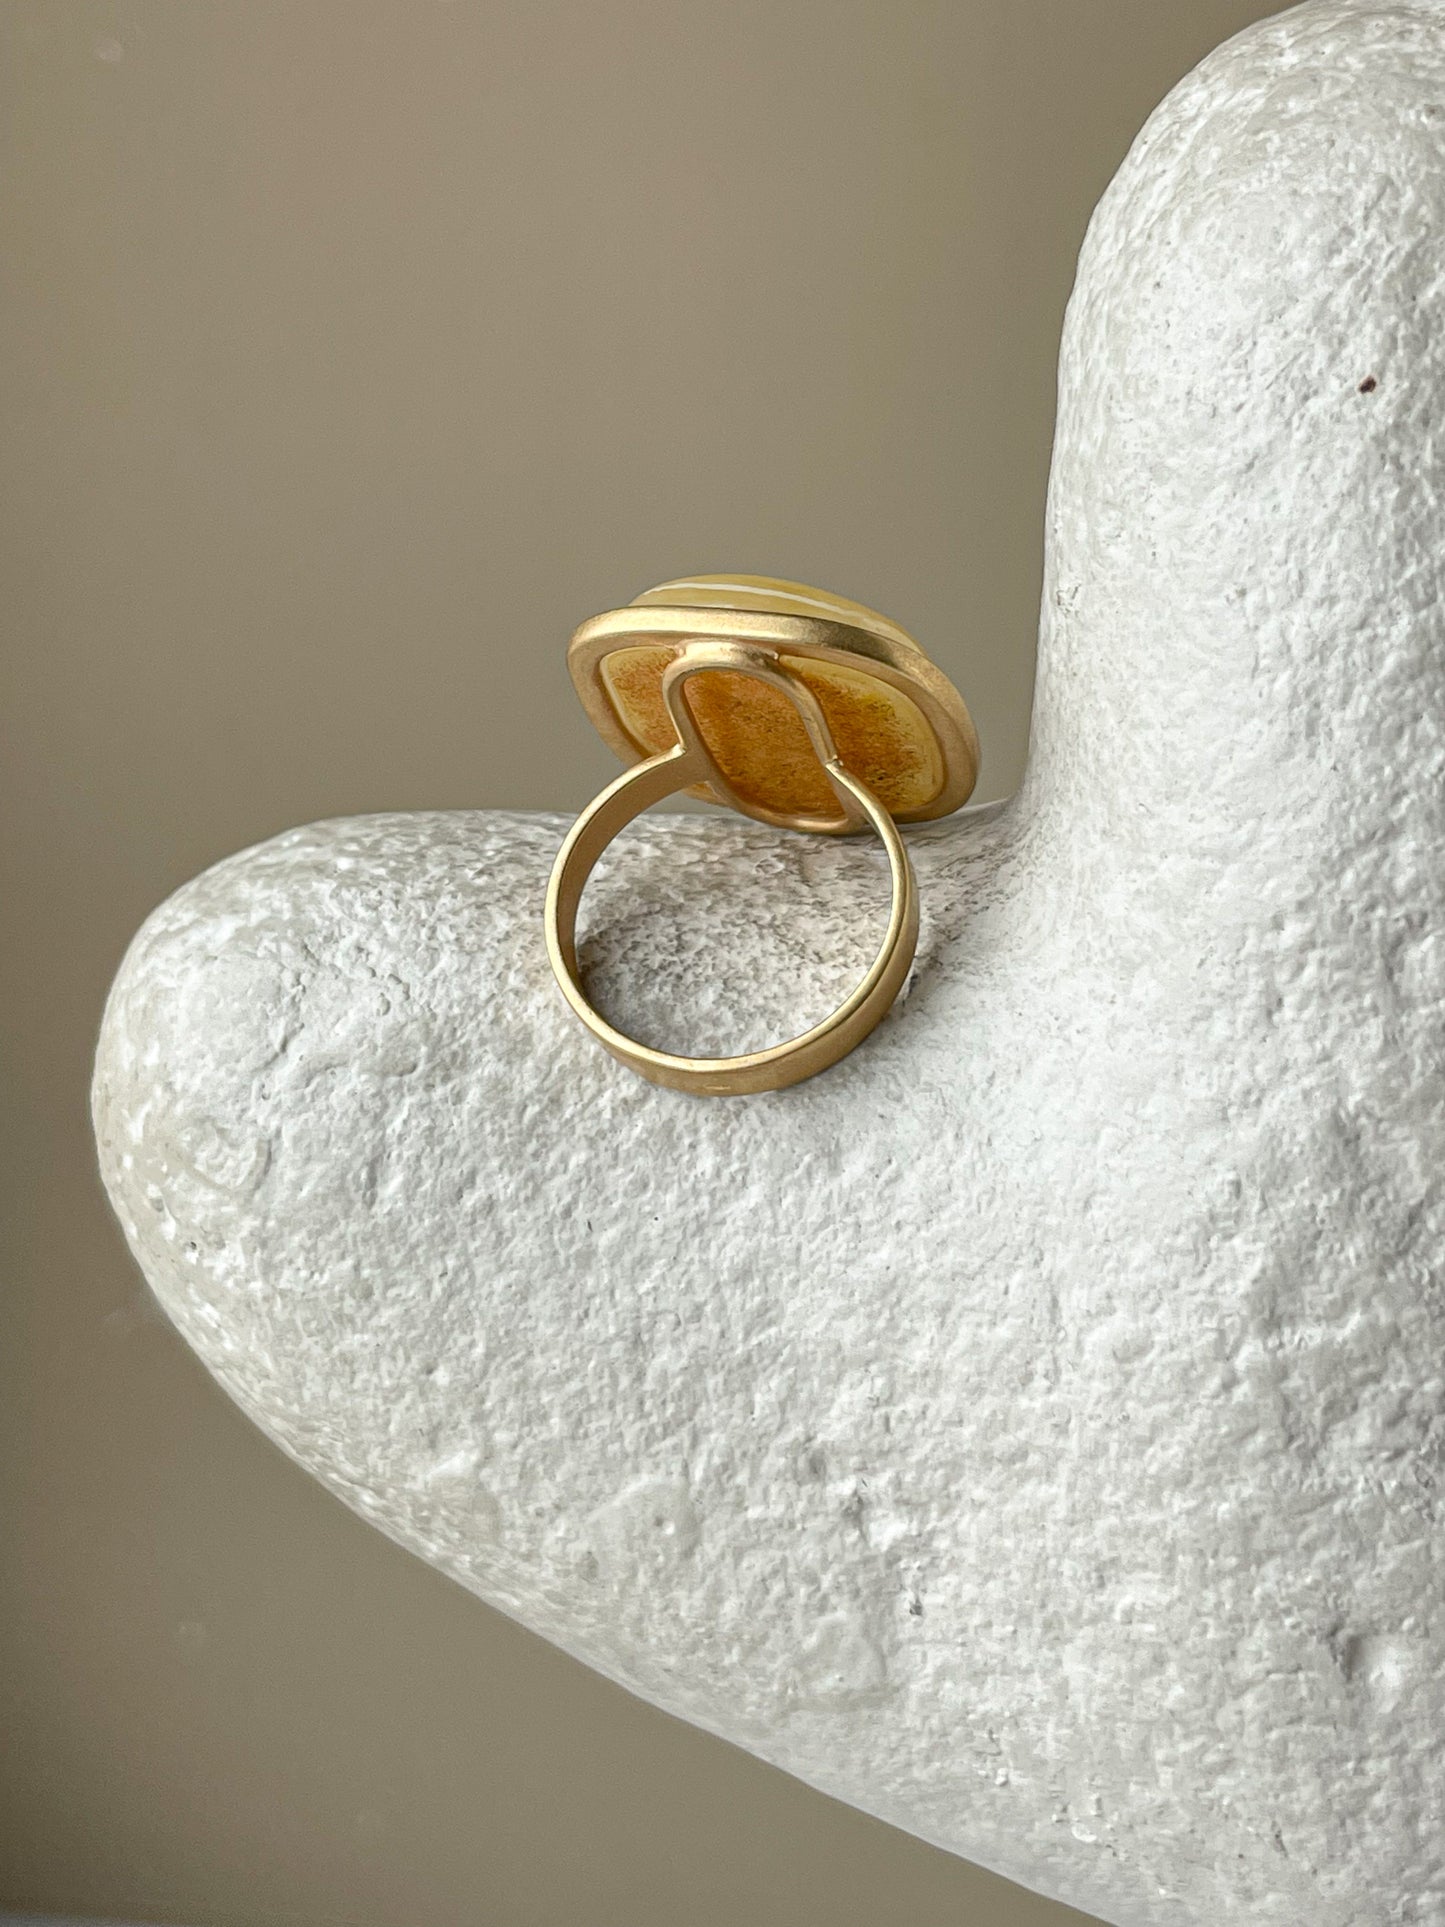 Butterscotch amber ring - Gold plated silver - Chunky ring collection - Size 8